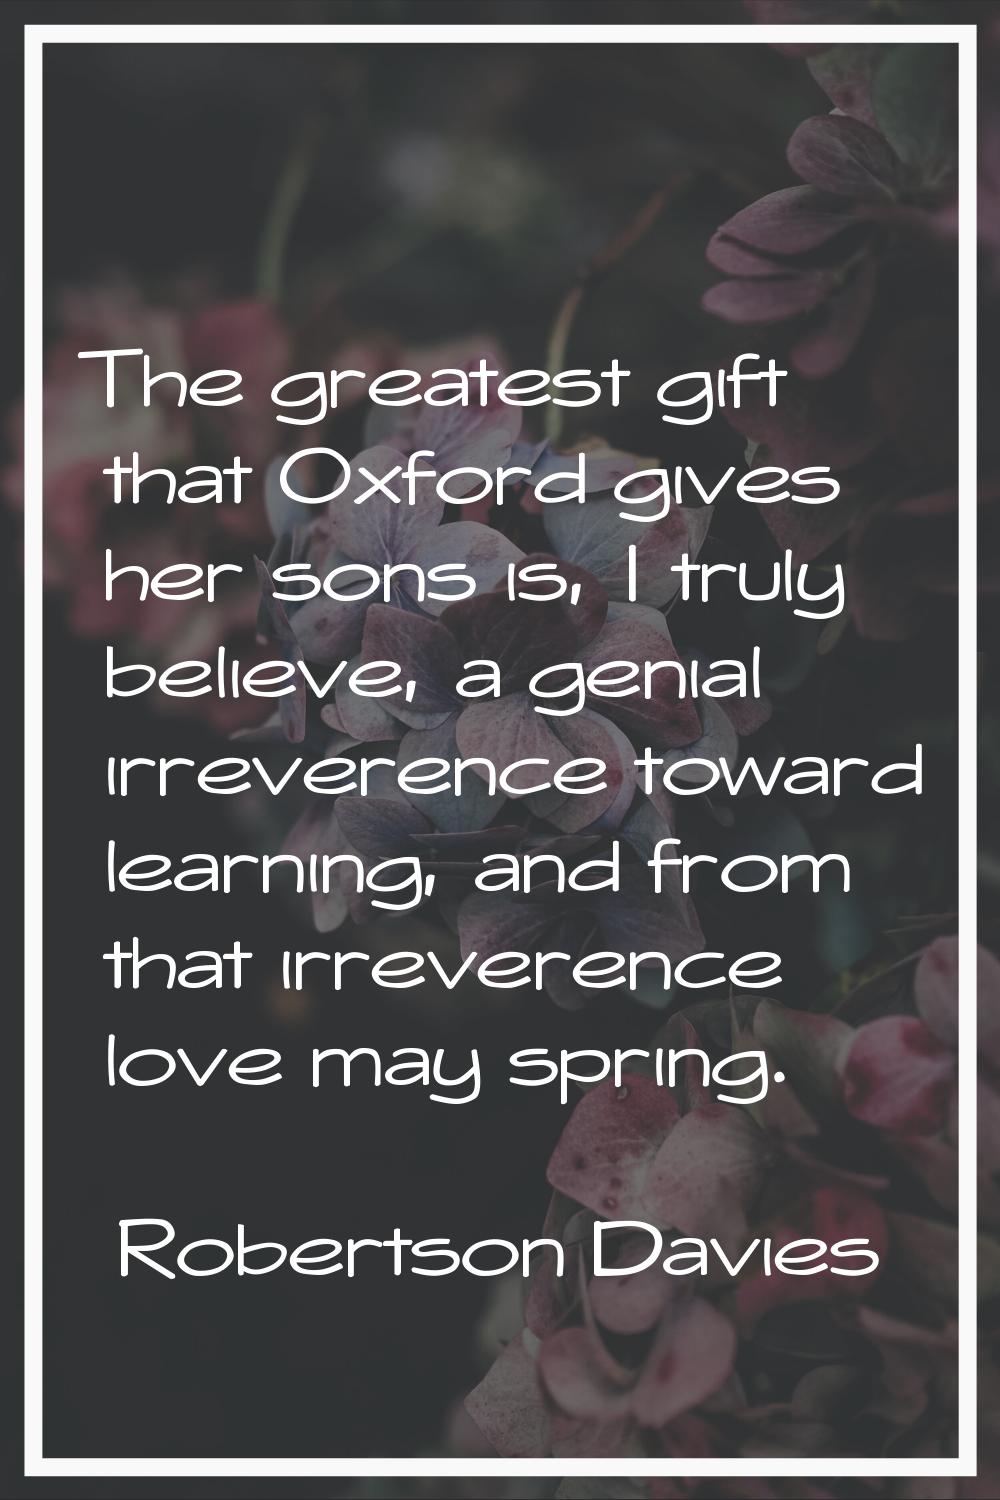 The greatest gift that Oxford gives her sons is, I truly believe, a genial irreverence toward learn